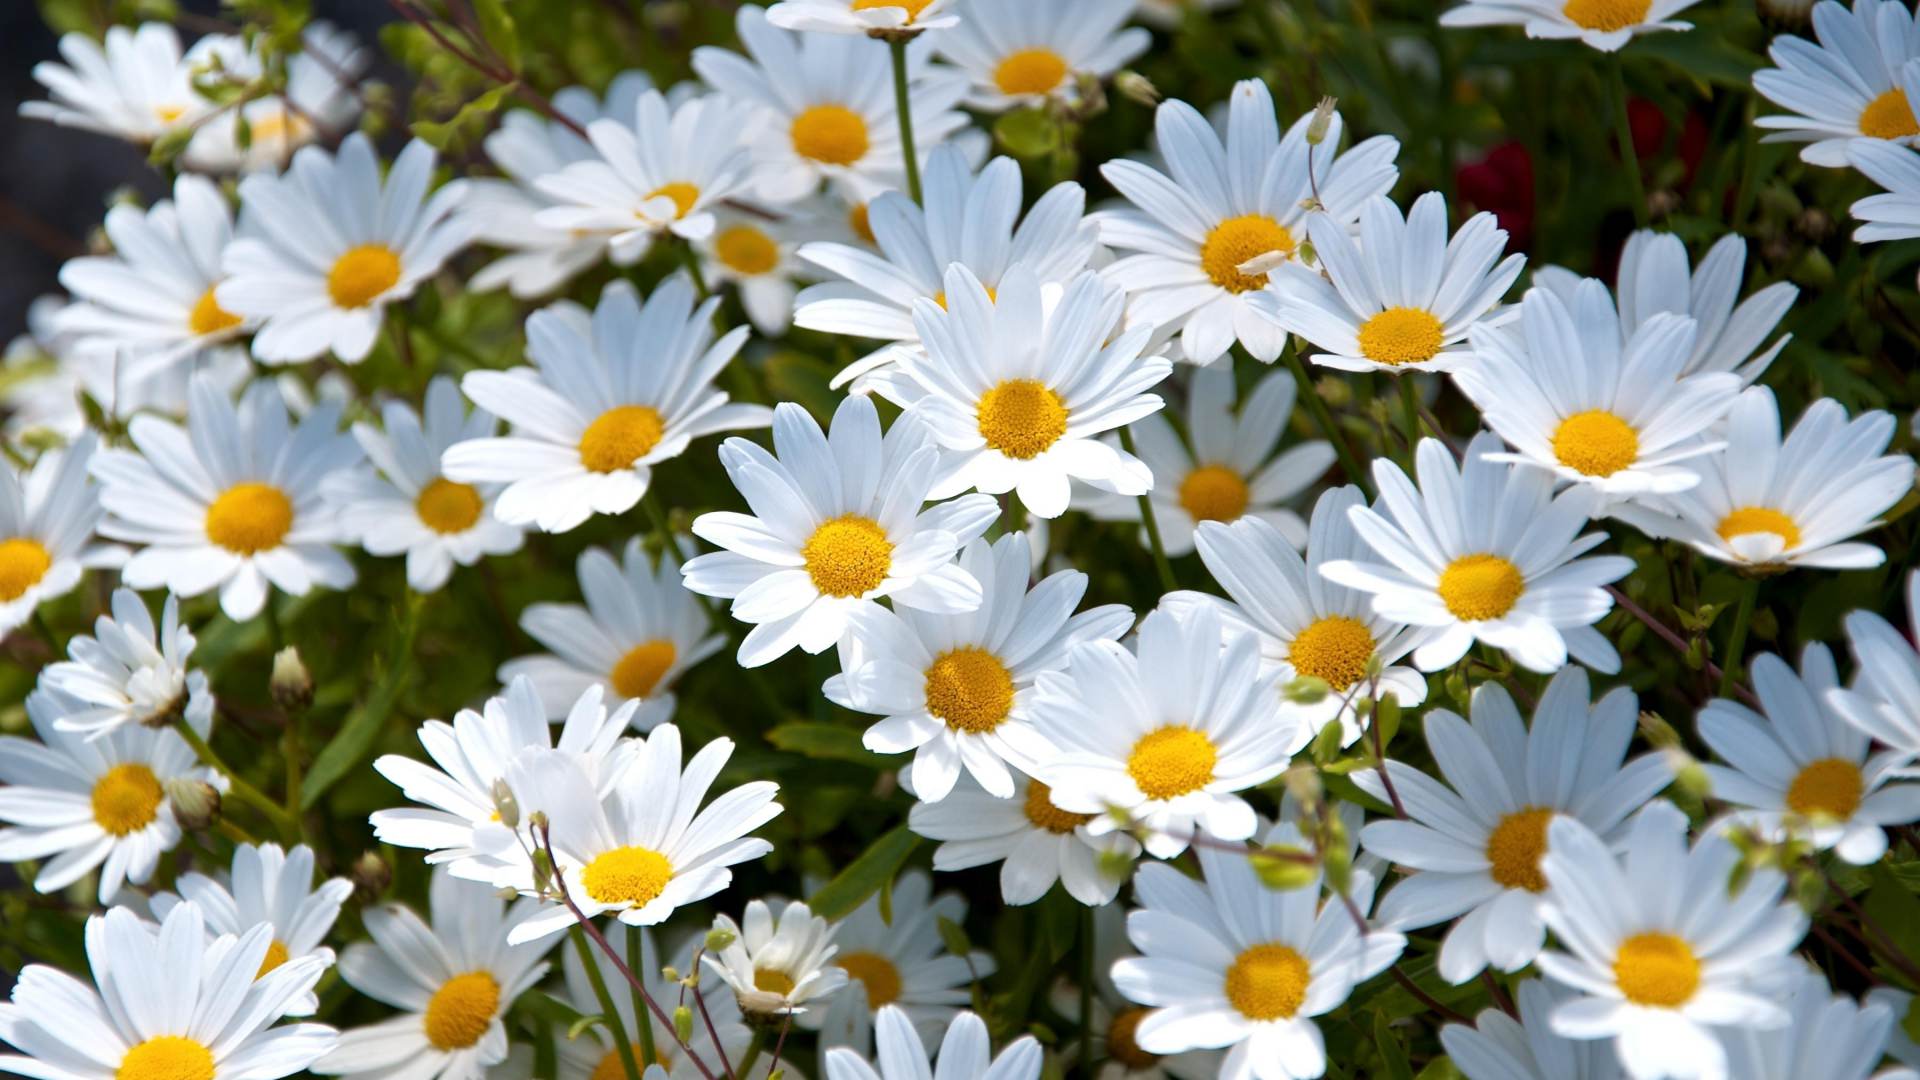 Daisy Background, Wallpaper, Image, Picture. Design